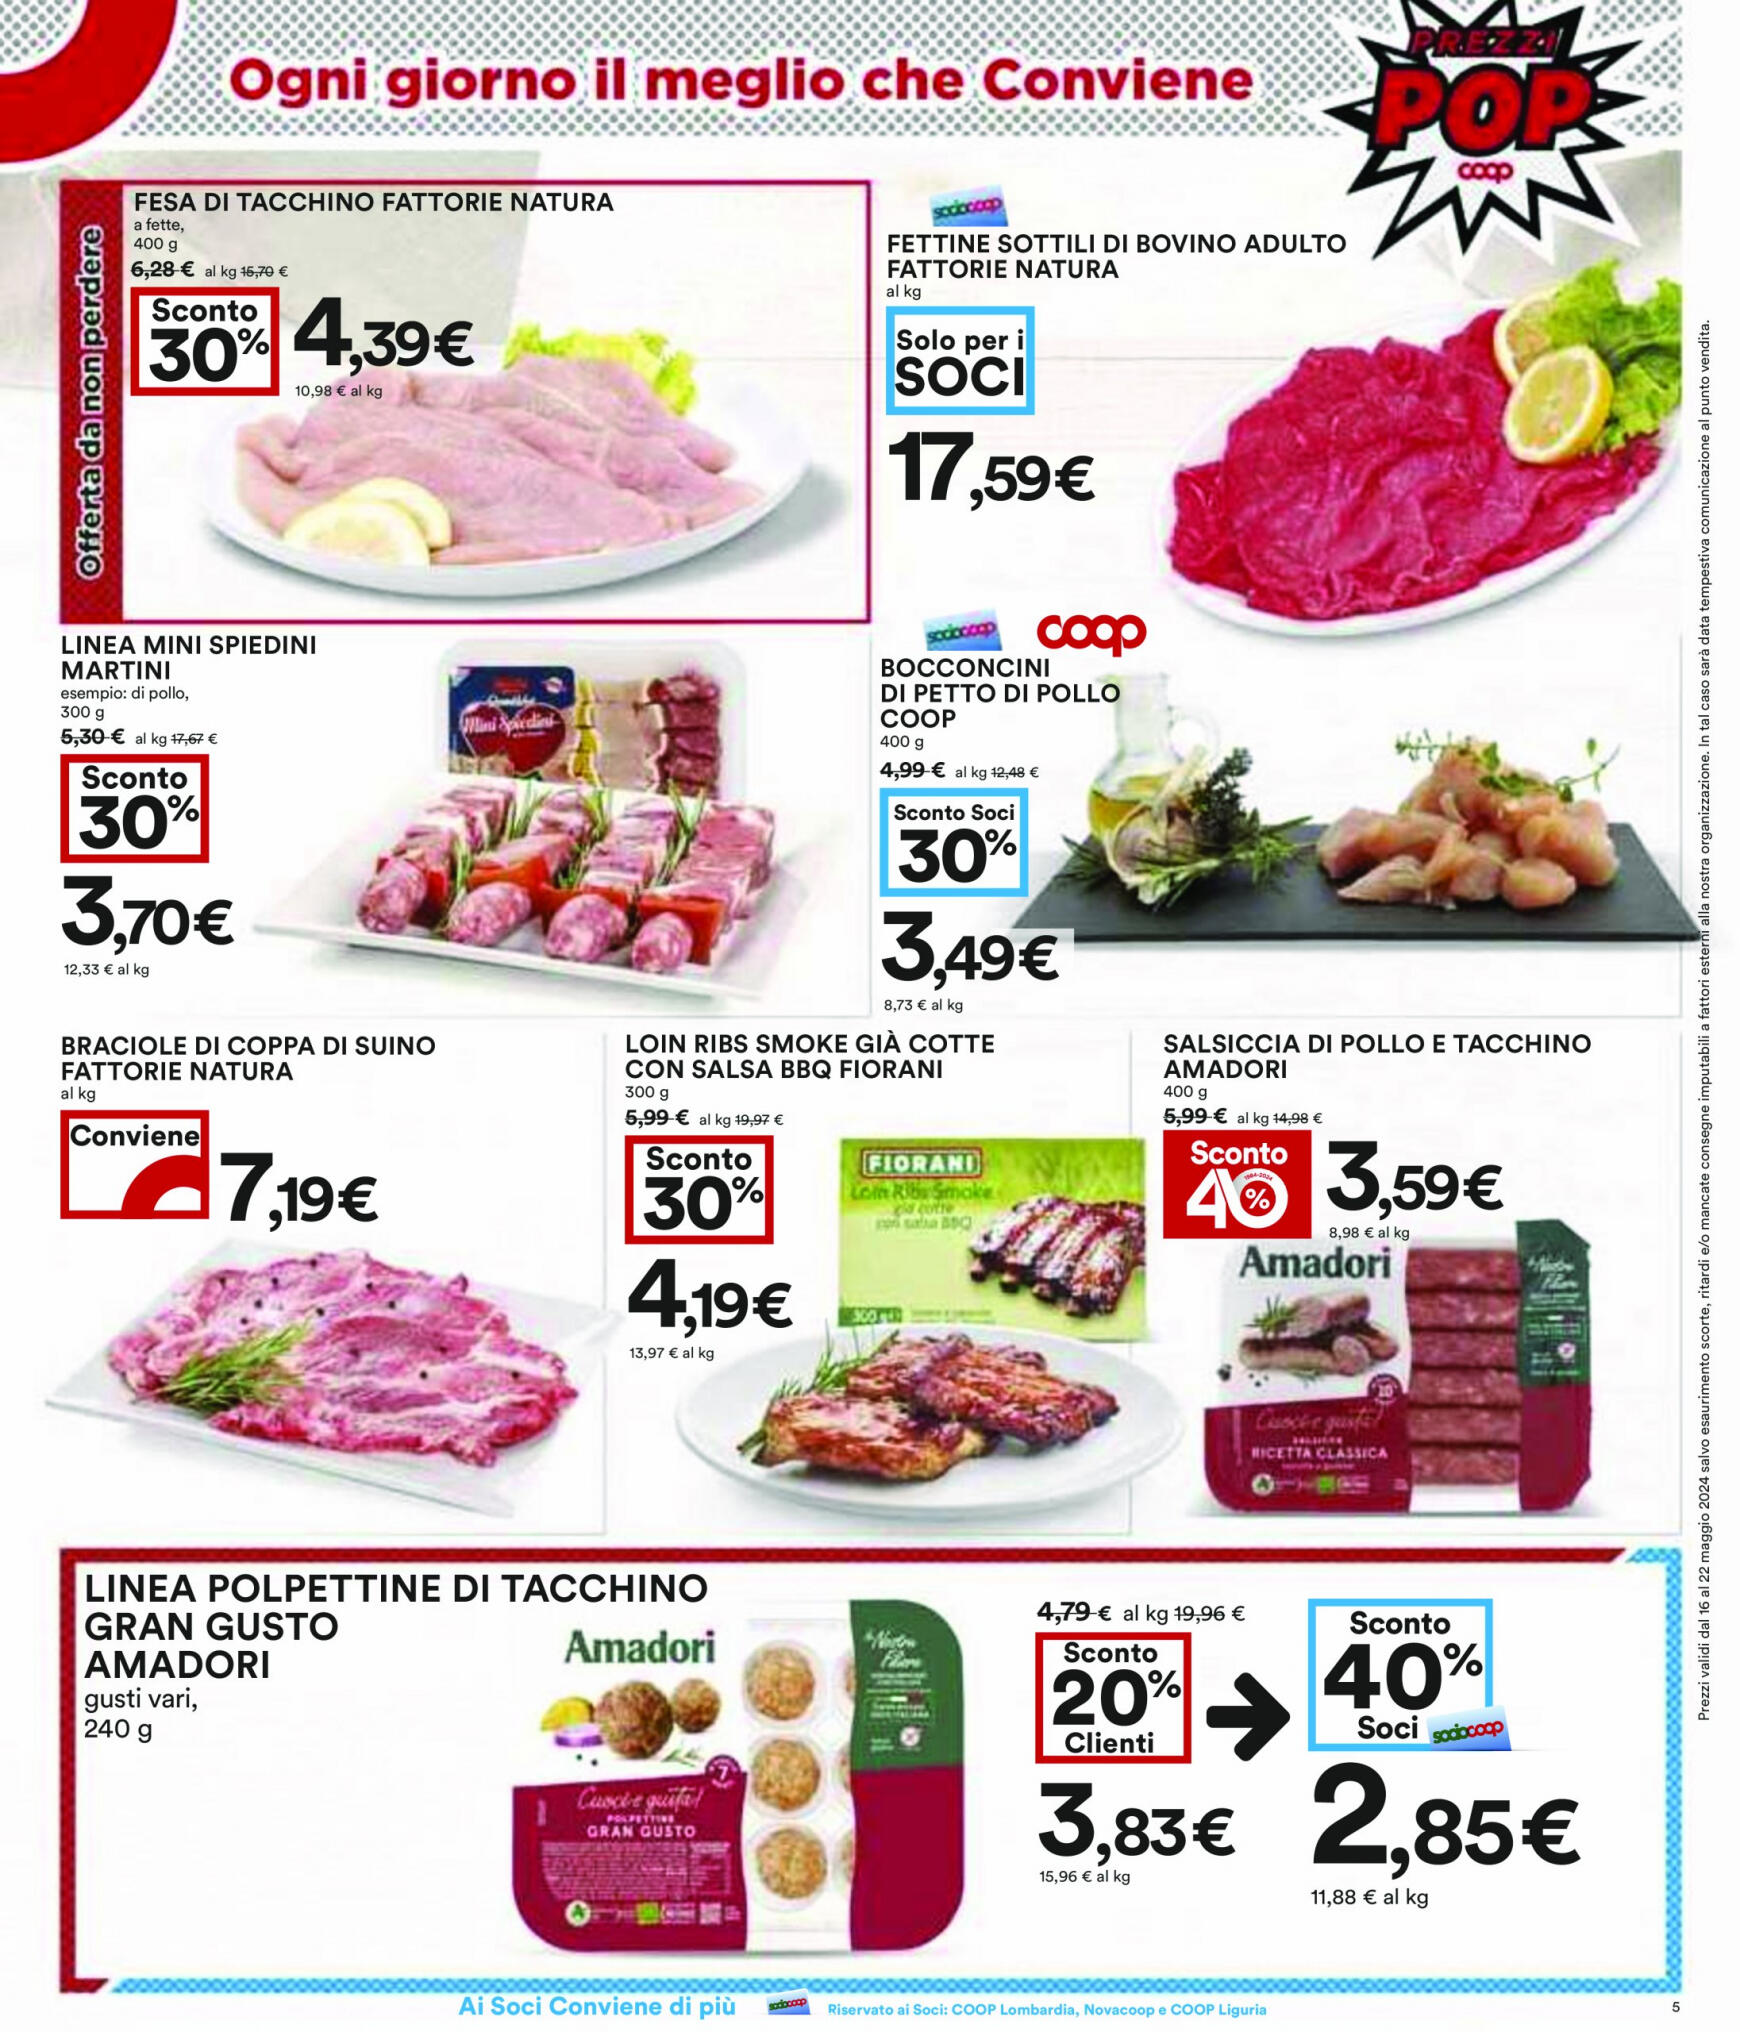 coop - Nuovo volantino Coop 16.05. - 22.05. - page: 5